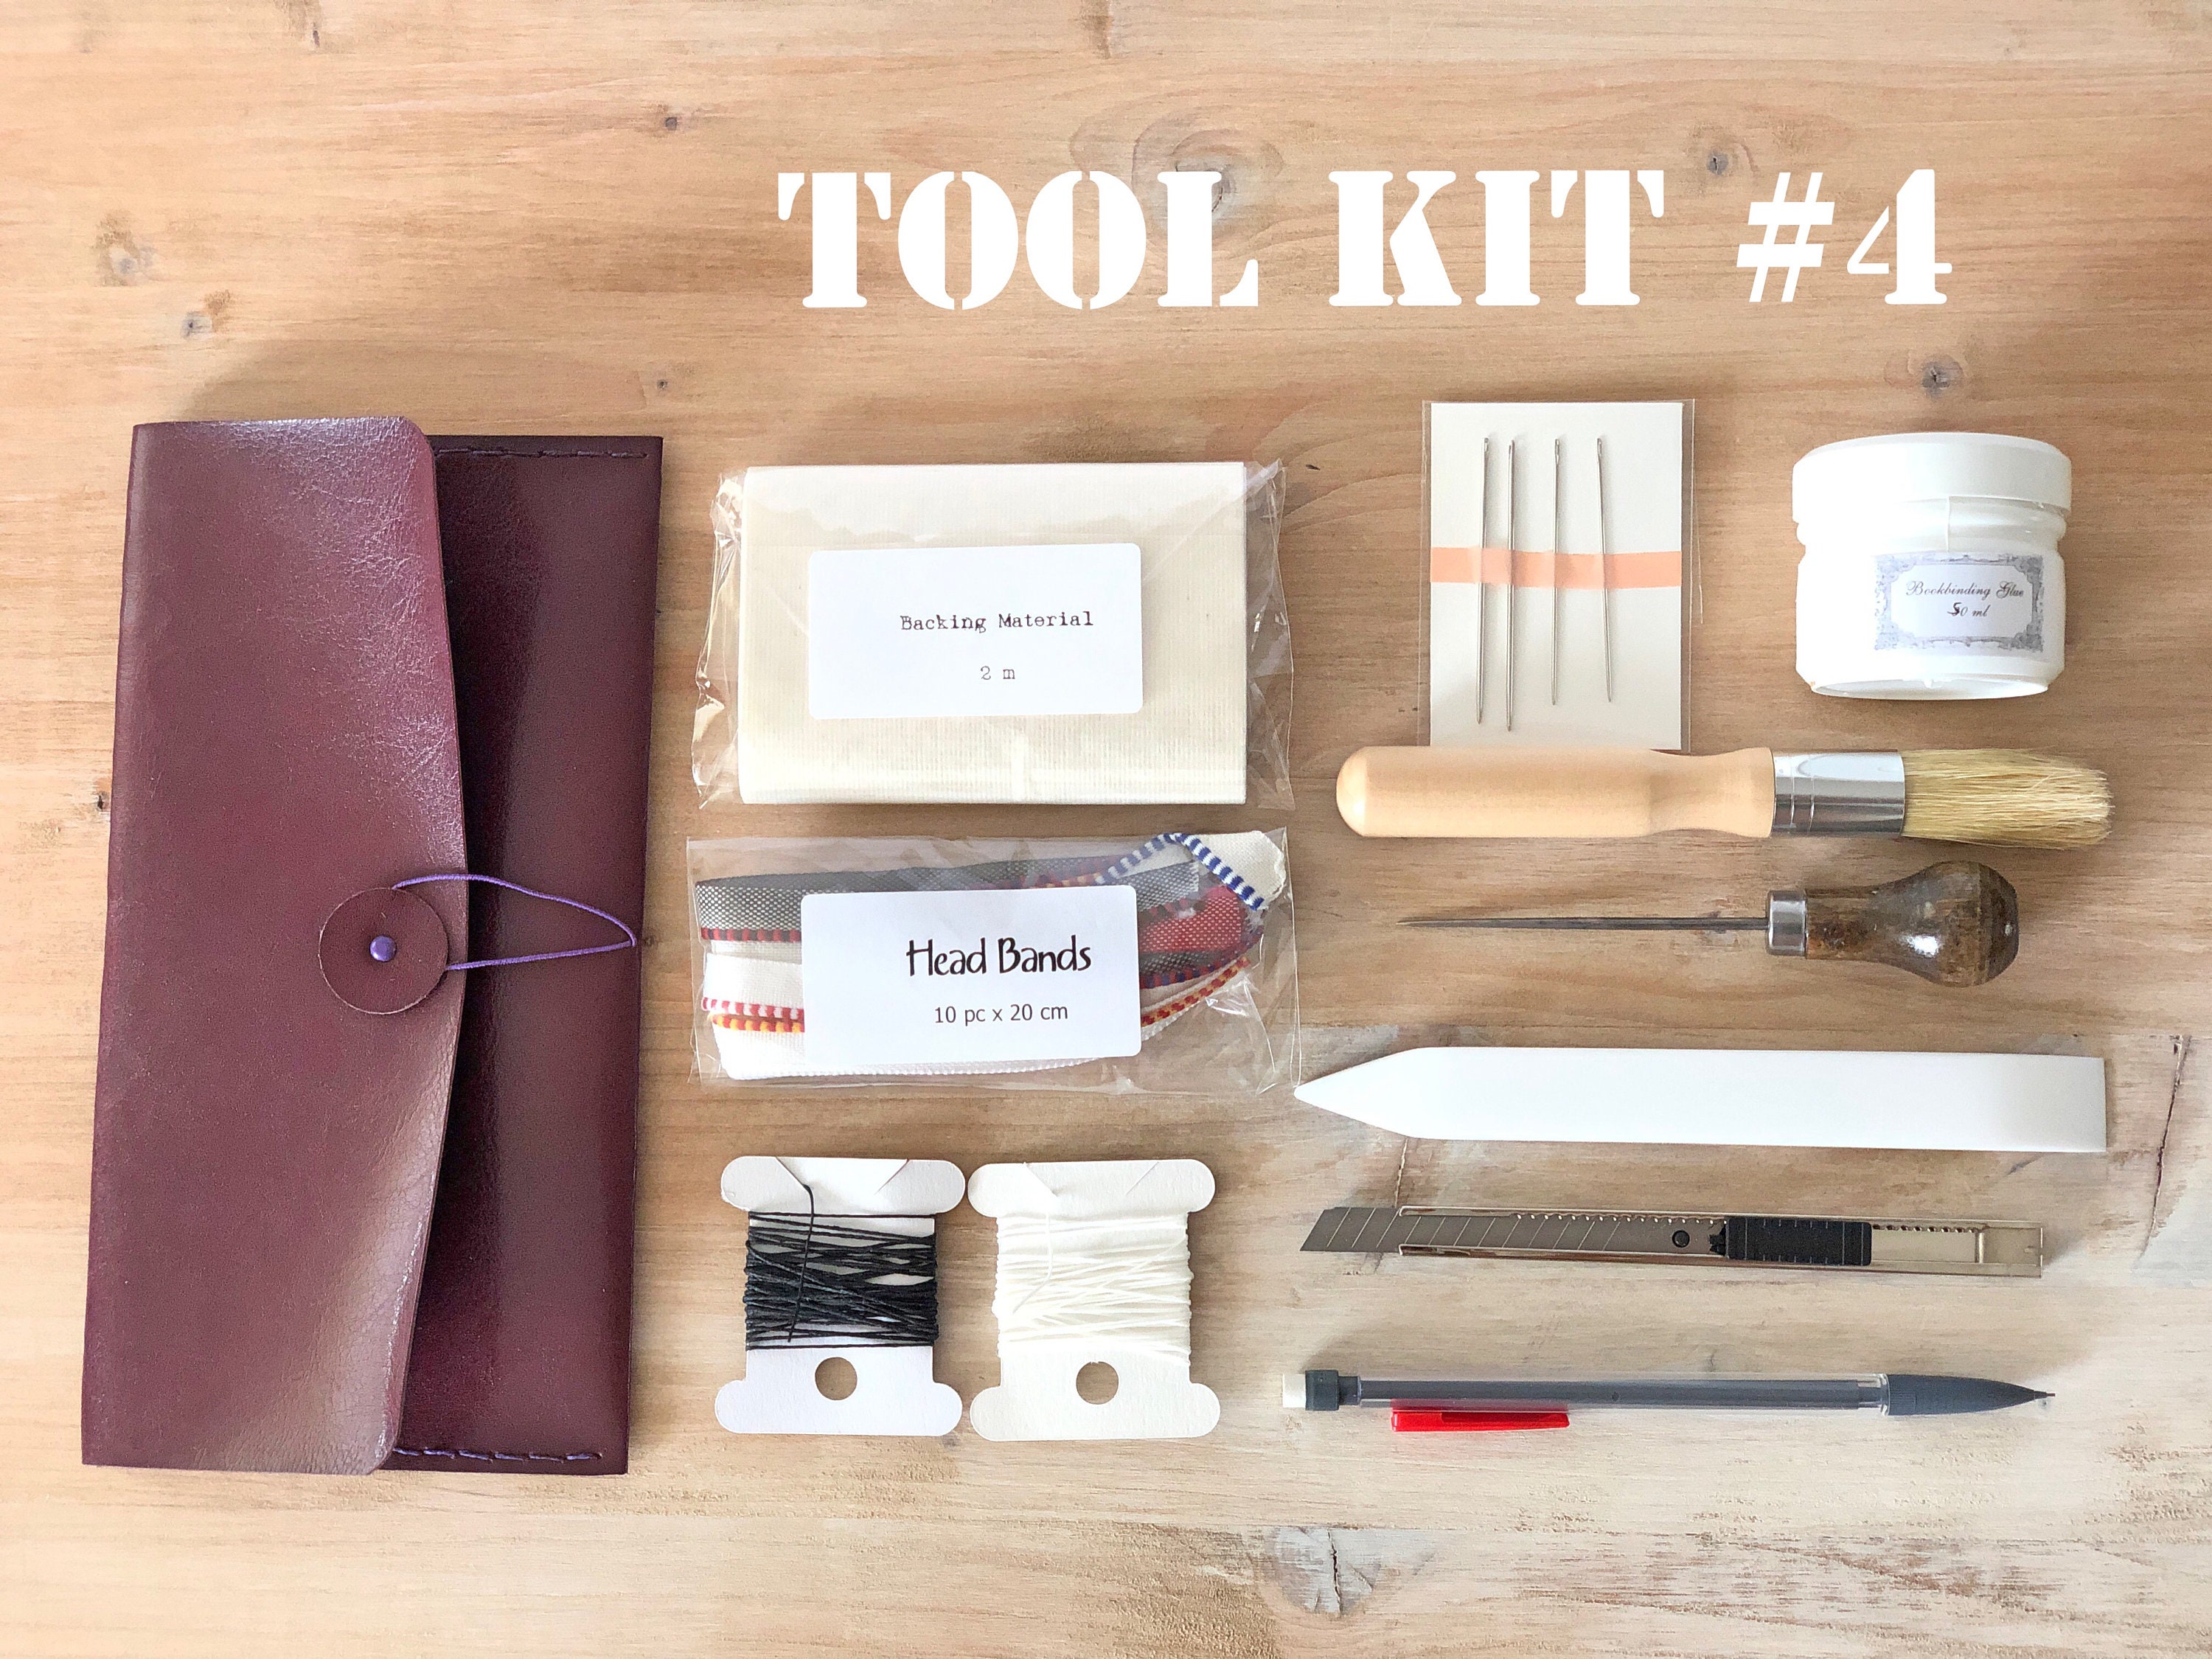 Sollas Bookbinding :: Book making kits to make your own special book